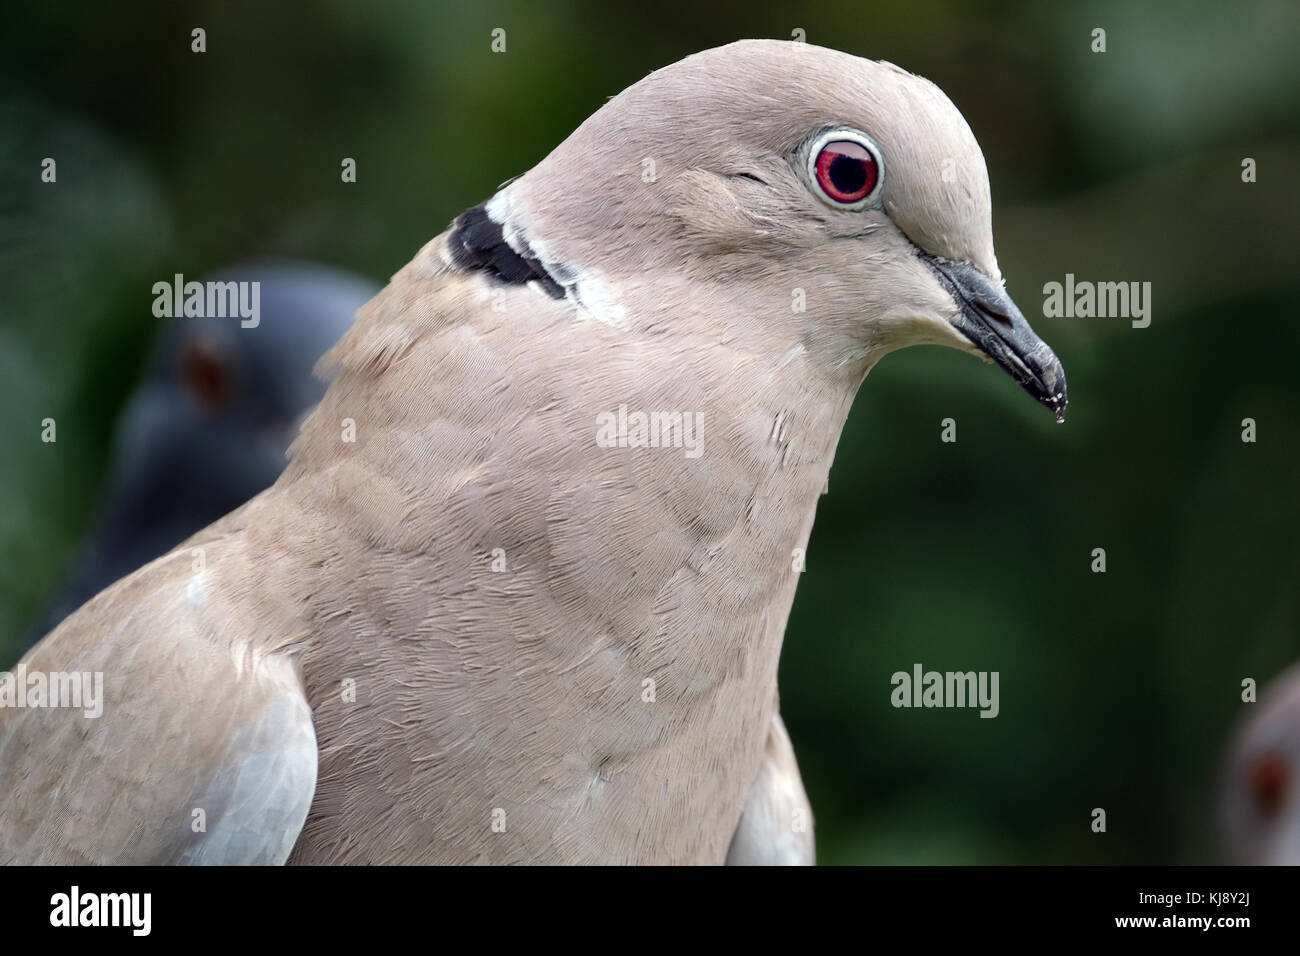 Head of Ring neck or Collared dove. Stock Photo